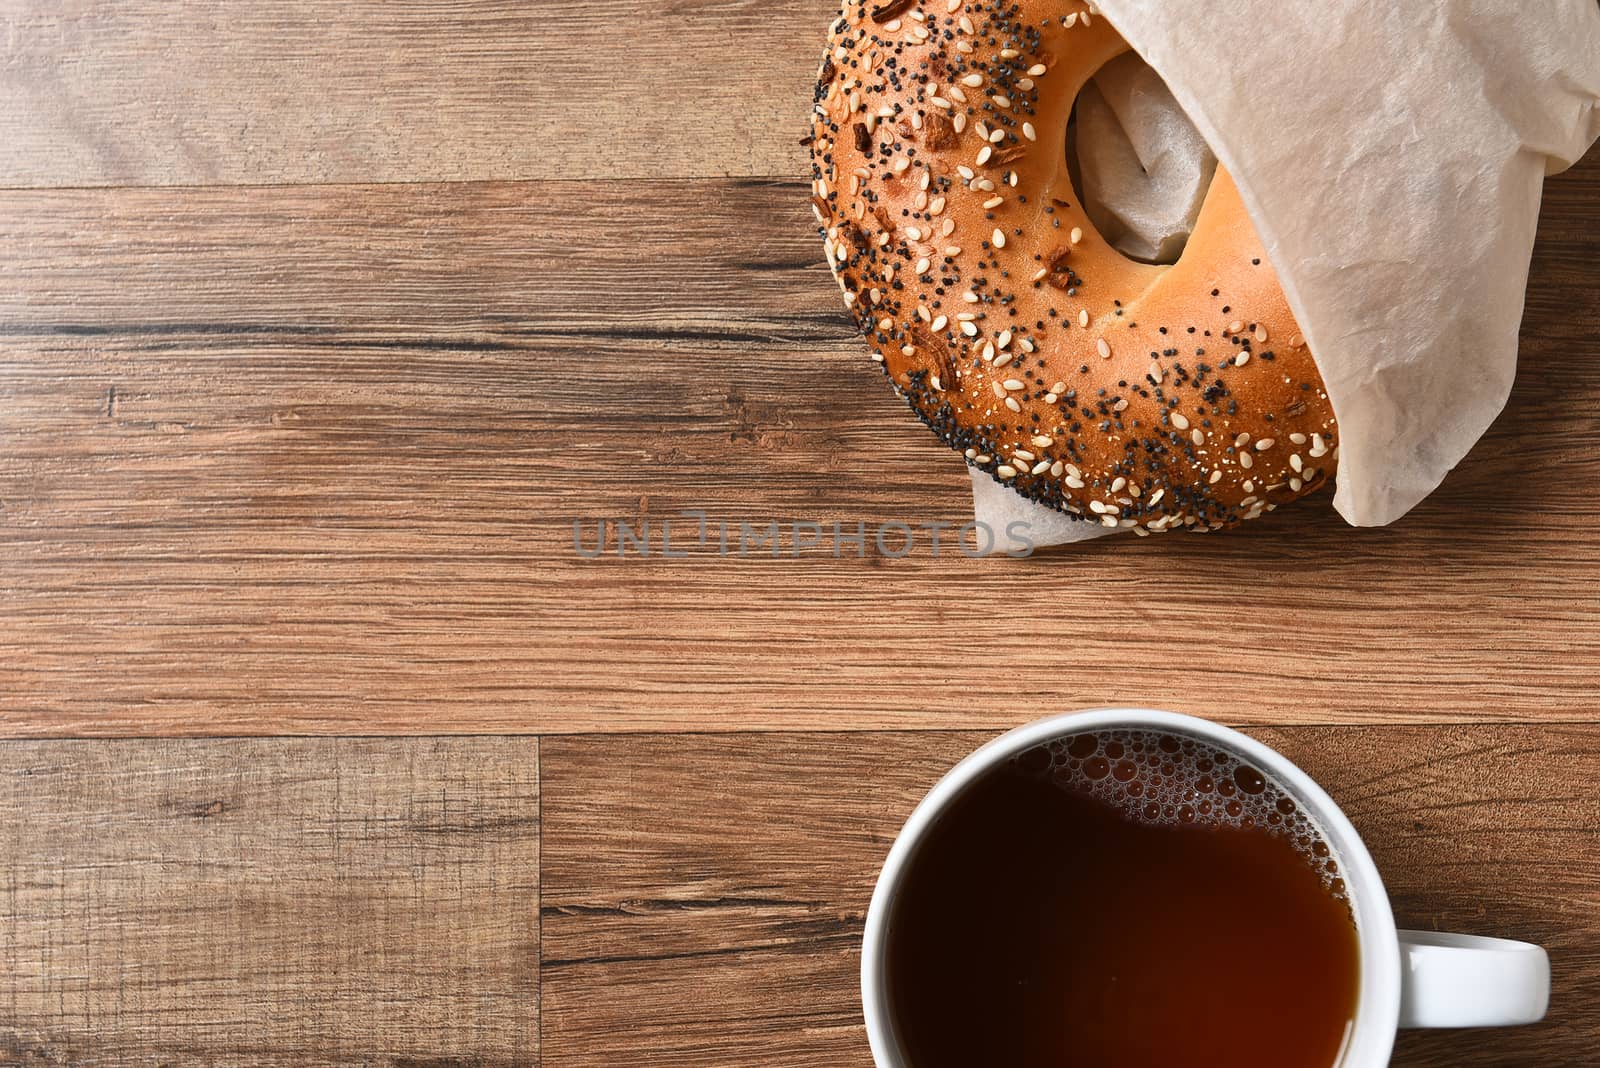 Fresh bagel and hot cup of coffee on a rustic wood table with copy space.